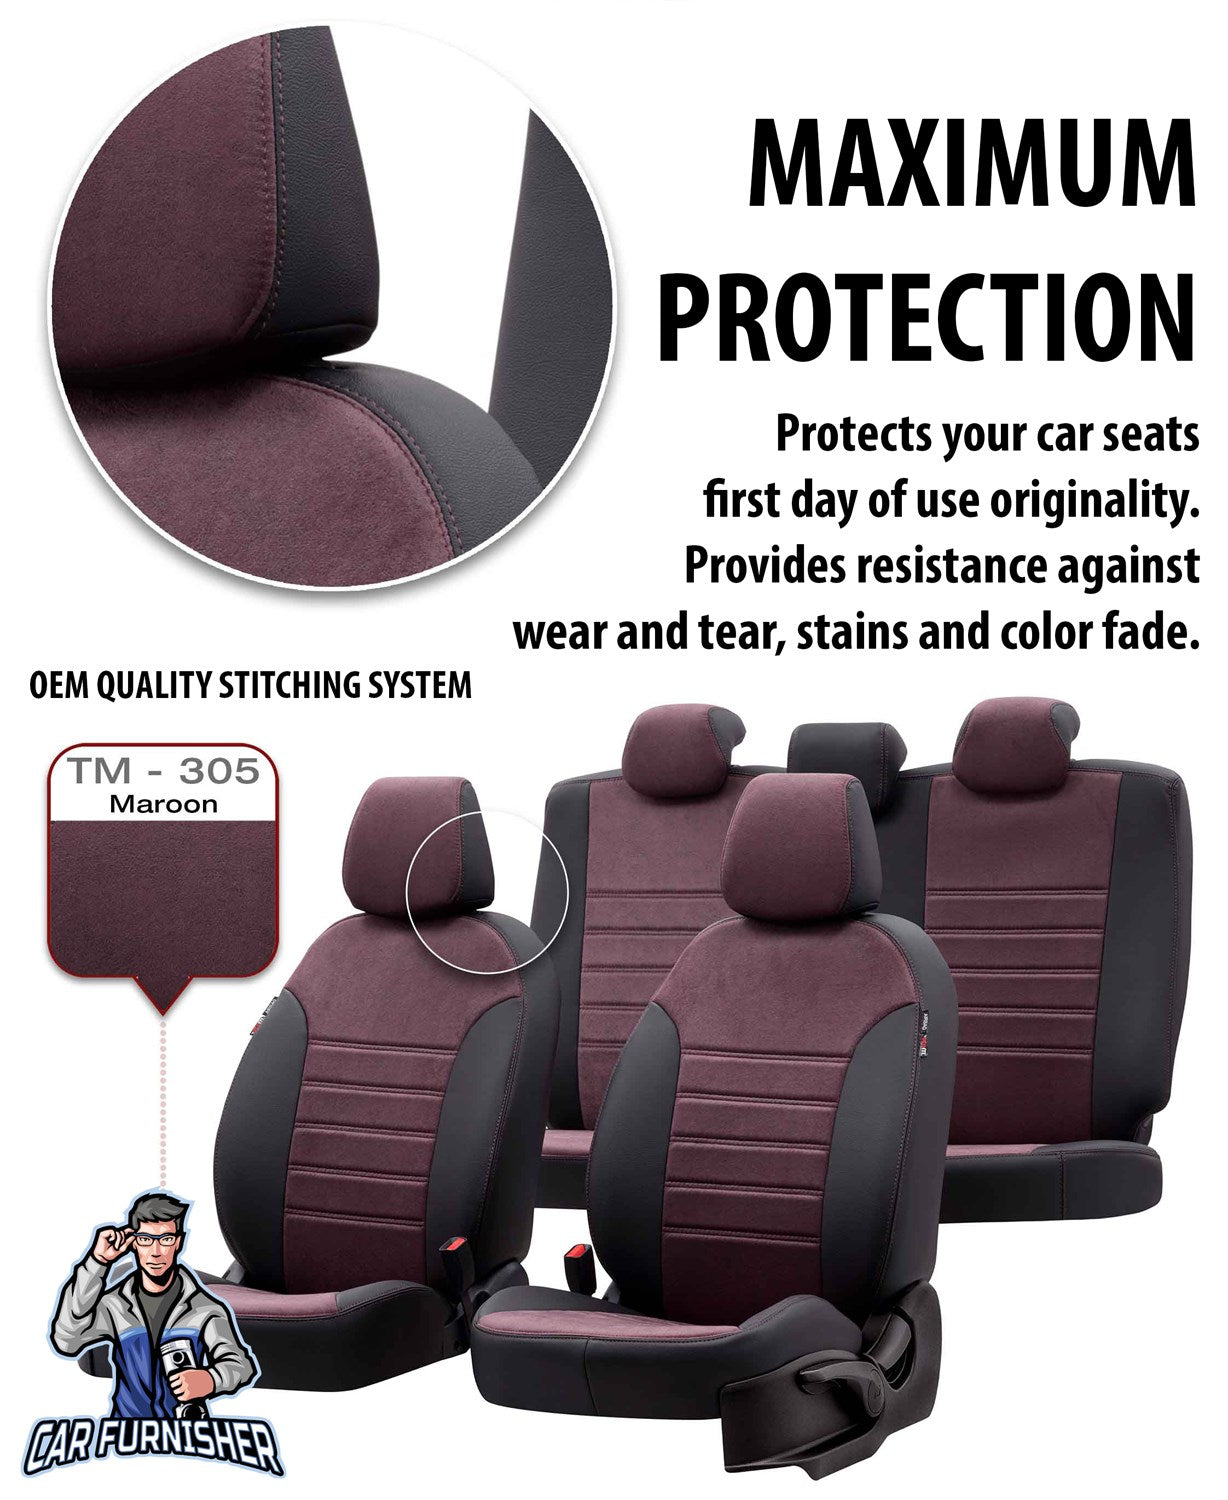 Volkswagen Caddy Seat Cover Milano Suede Design Black Leather & Suede Fabric